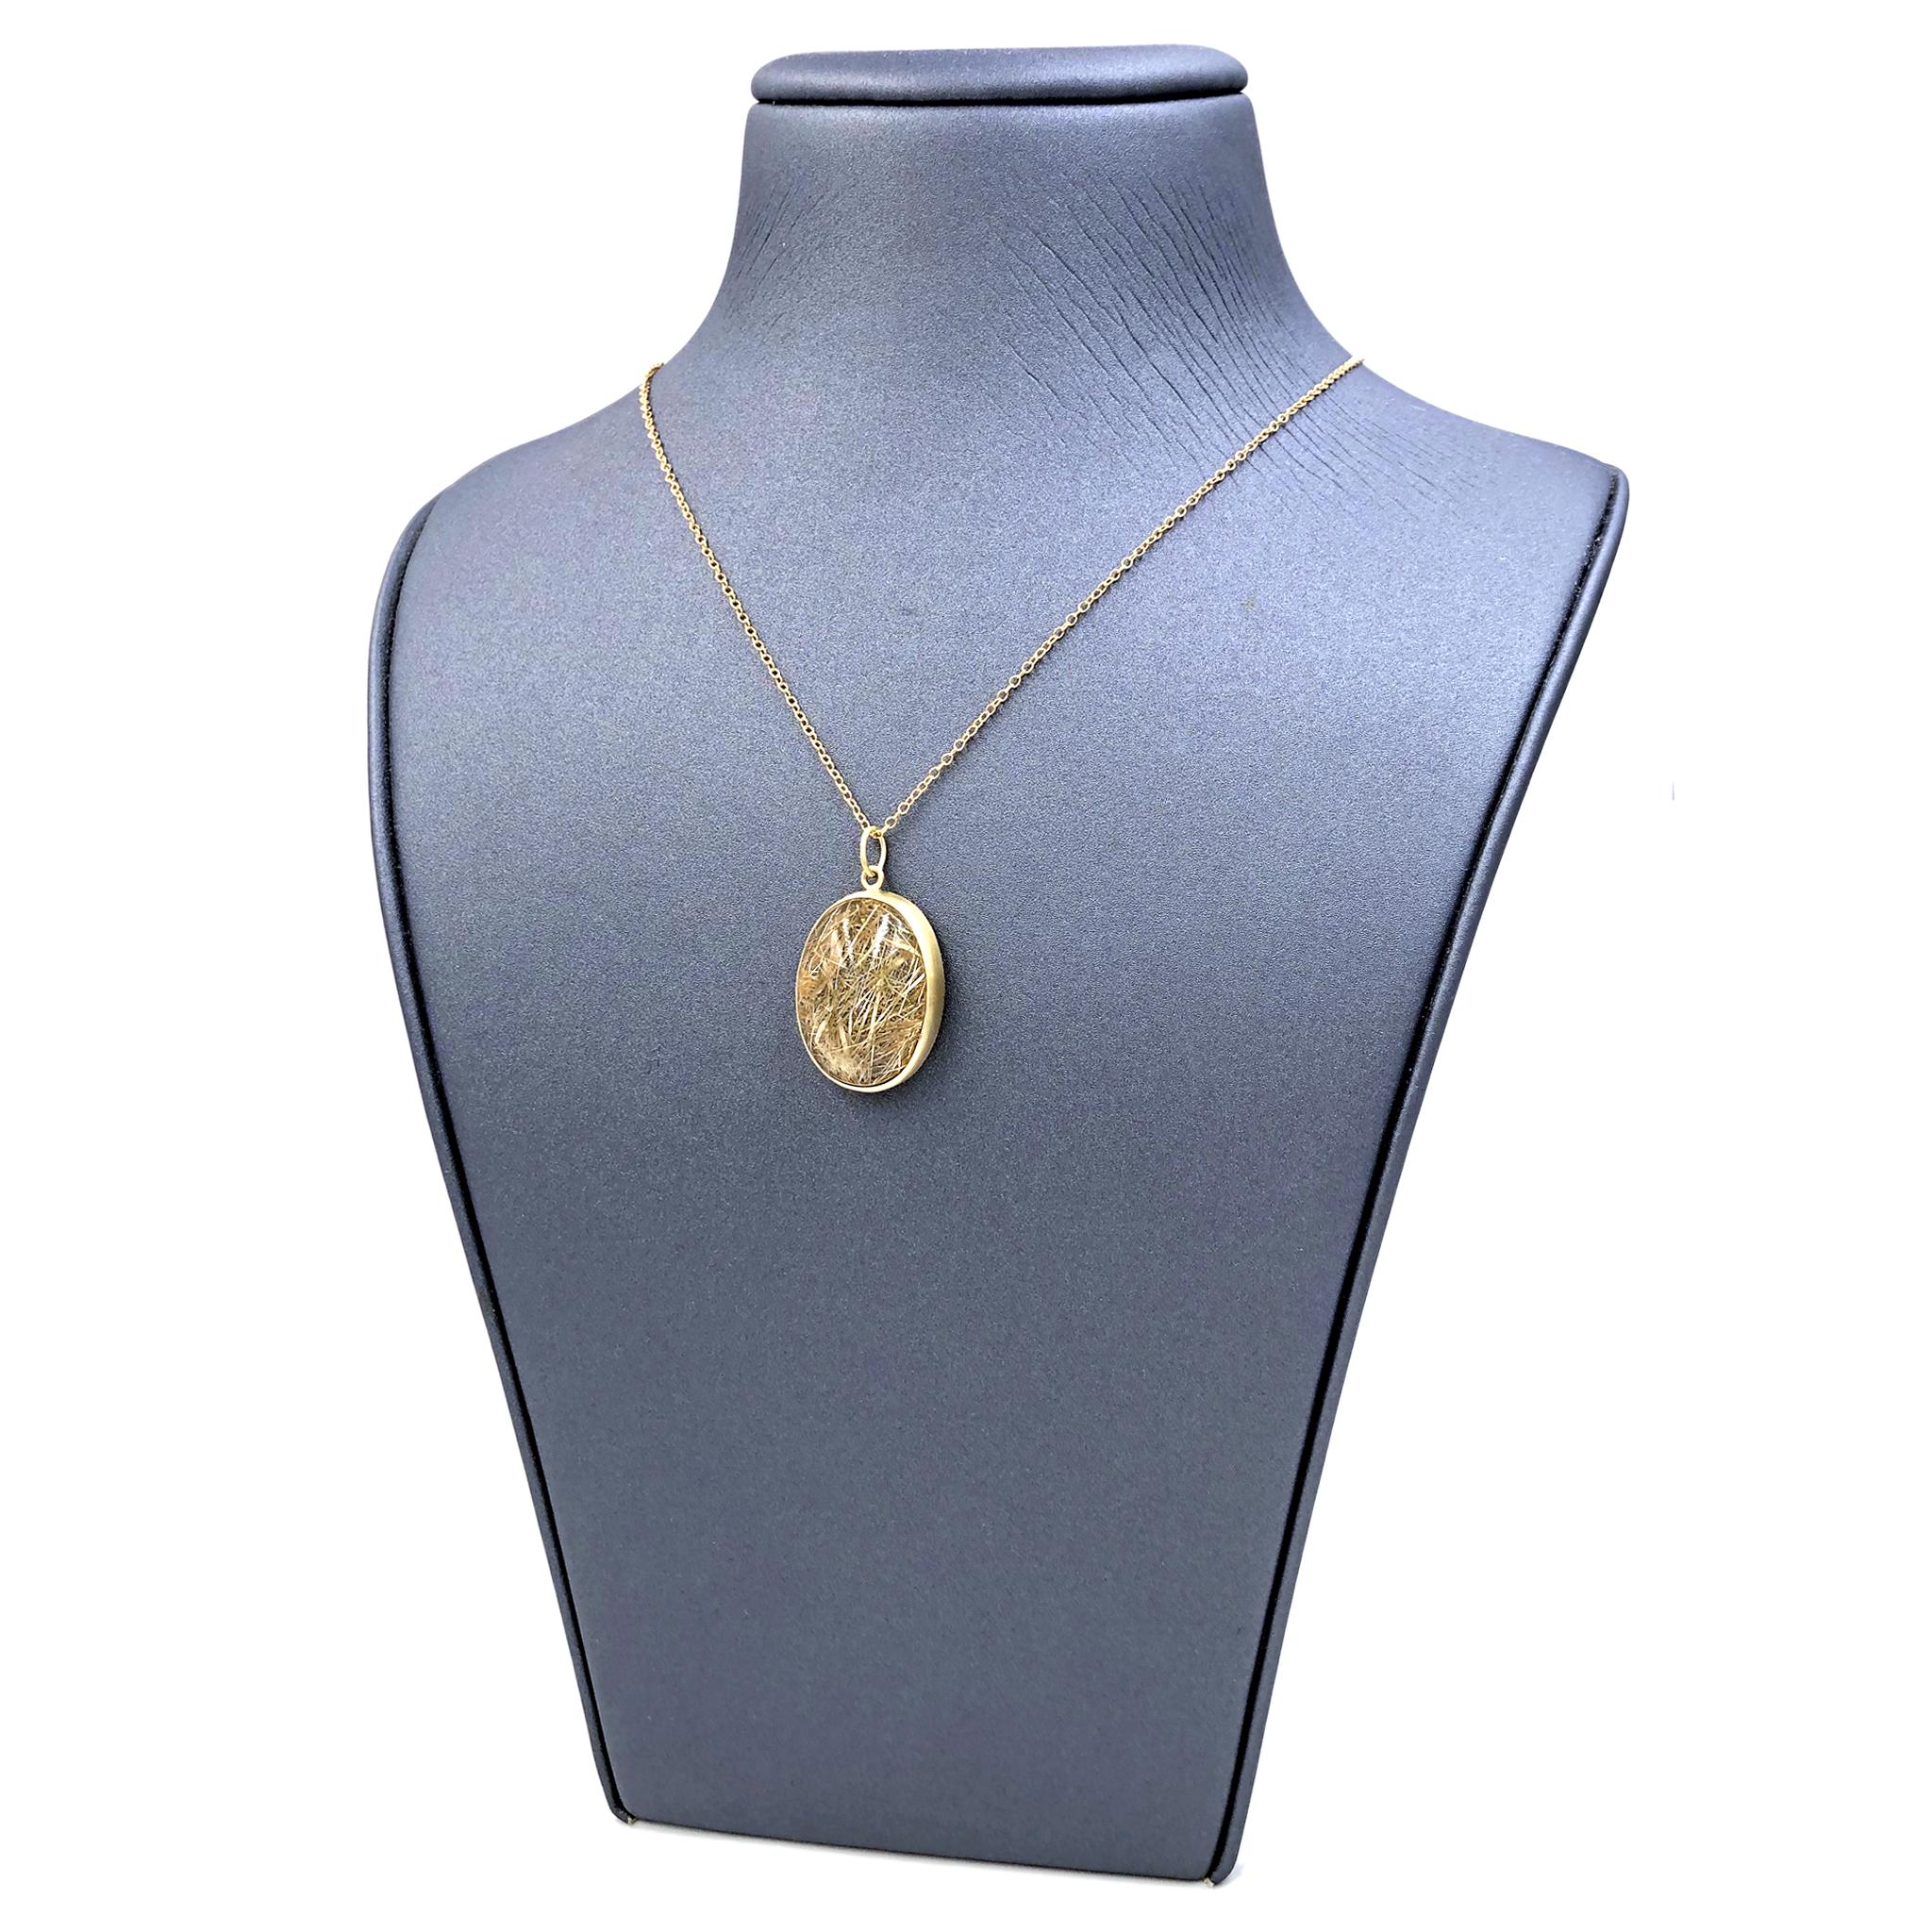 One of a Kind Drop Necklace handcrafted by jewelry artist Monica Marcella featuring a phenomenal golden rutilated quartz cabochon bezel-set in matte-finished 18k yellow gold  and attached to an 18 inch long 18k yellow gold link chain. Stamped 750.